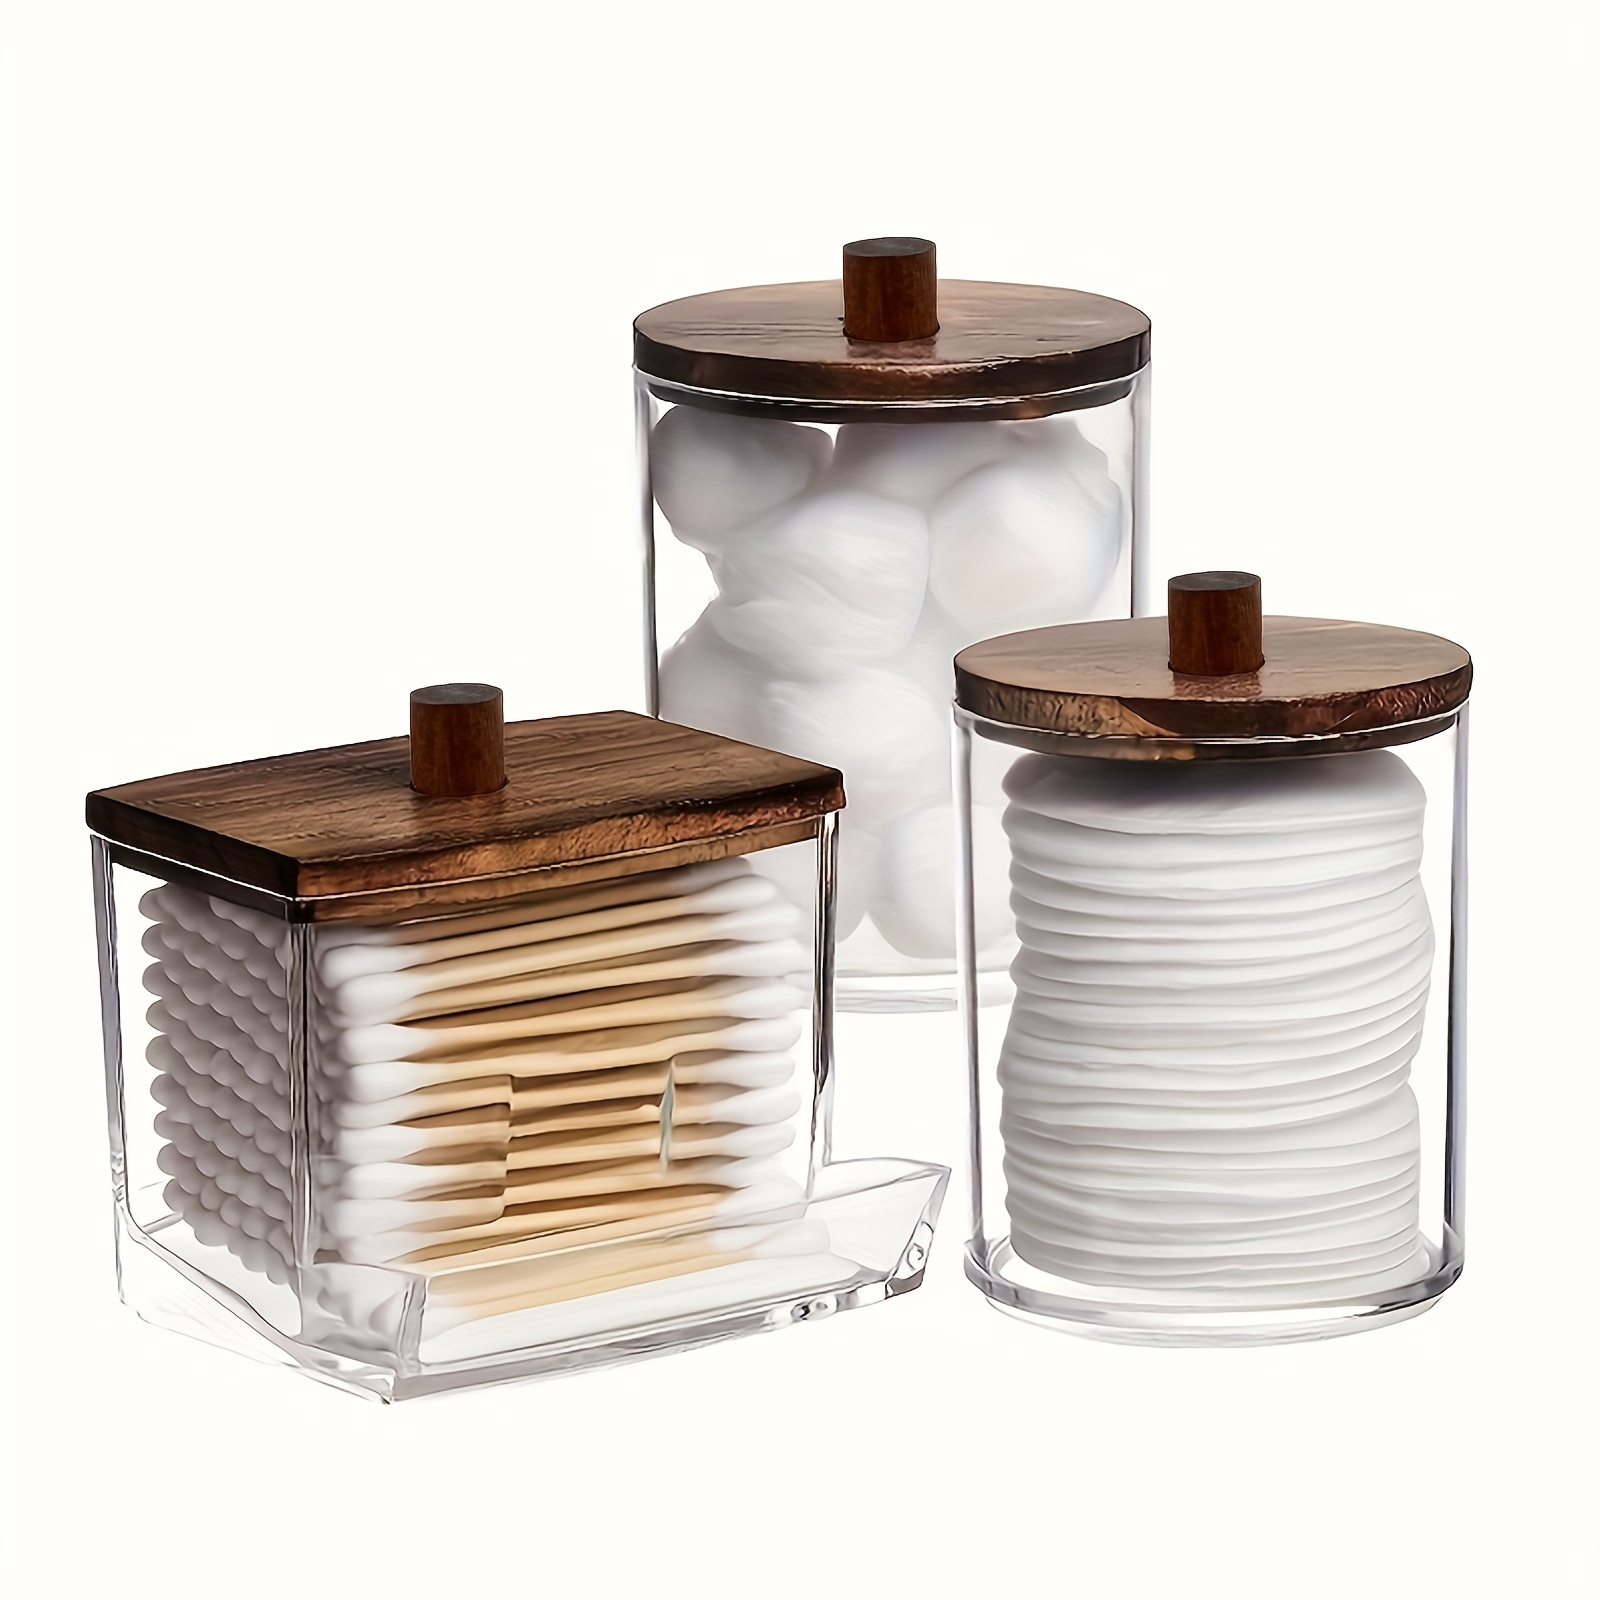 

3pcs Cotton Swab Organizers With Bamboo Lids, Dust-proof Lidded Plastic Round Cotton Buds Box Case, Cosmetic Pads Storage Containers For Bathroom Accessories